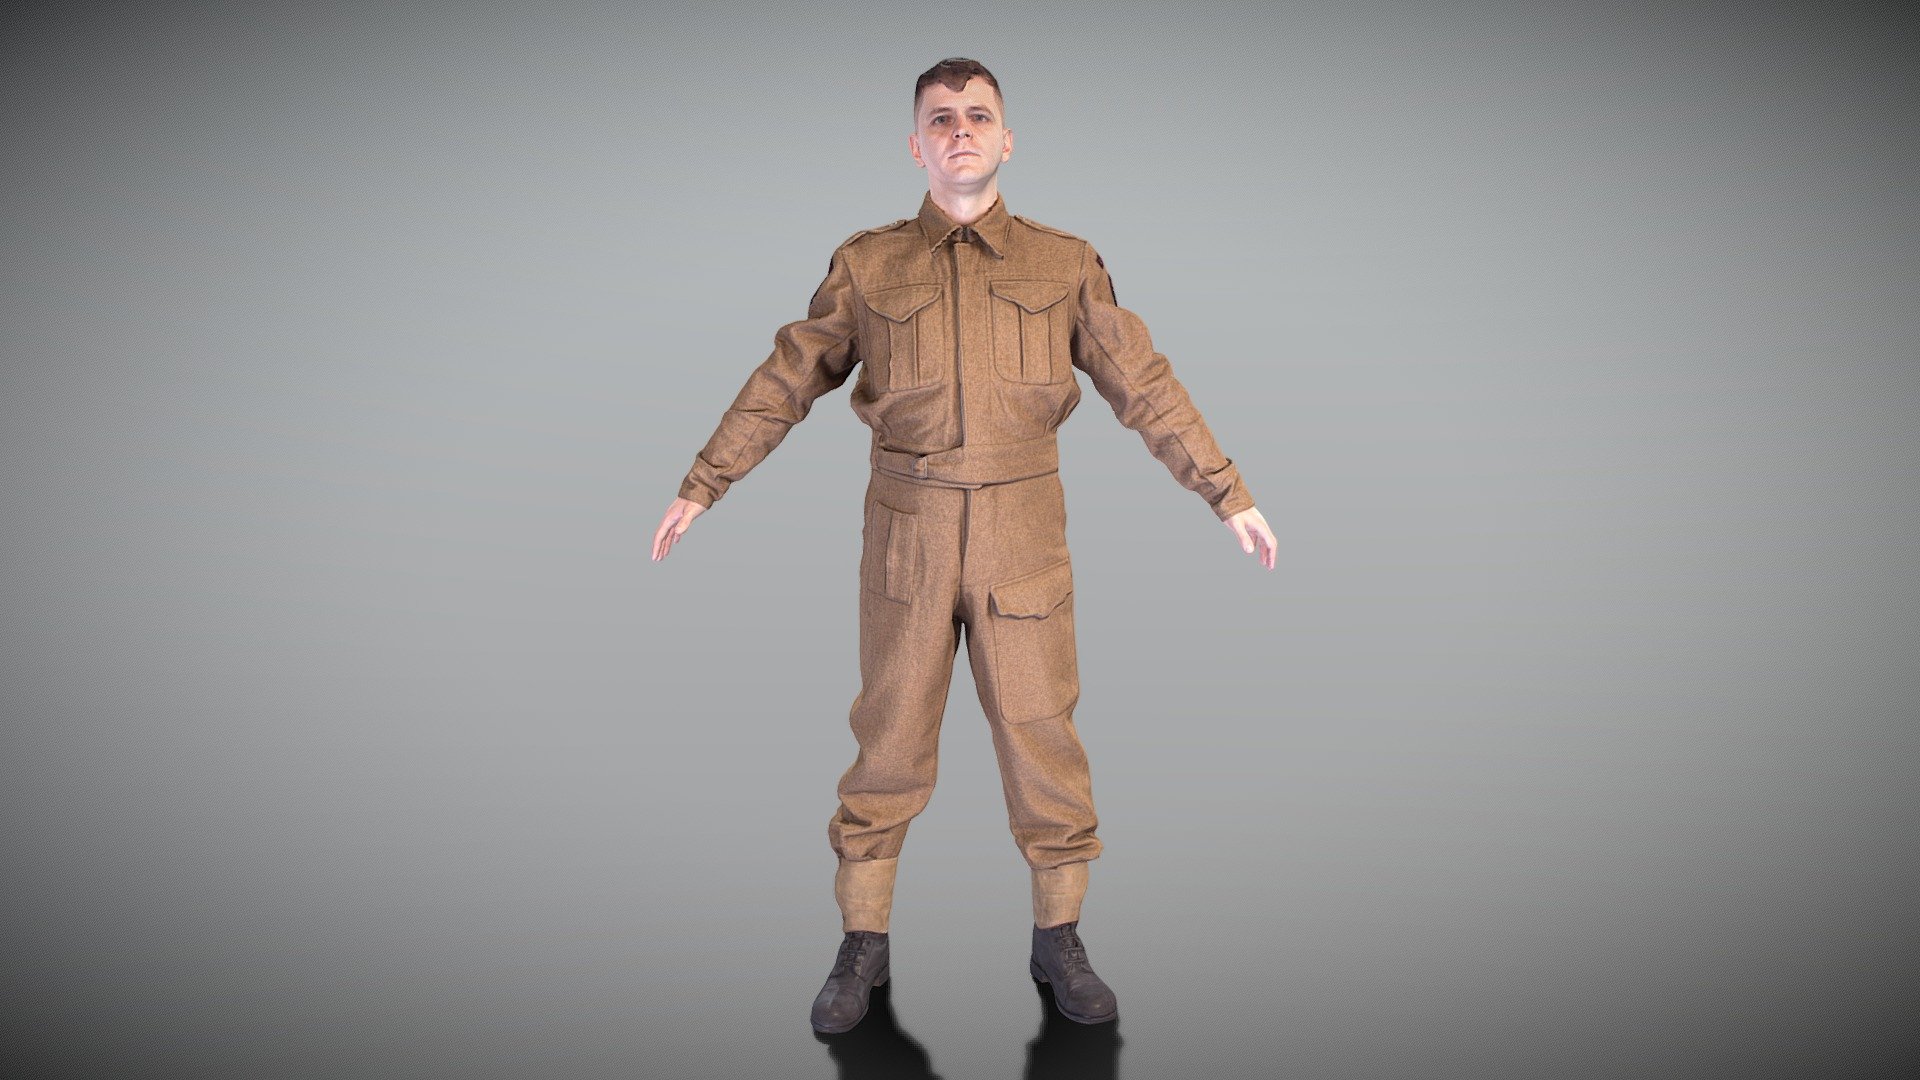 This is a true human size and detailed model of a British military from WW2. All props and suit are original. The model is captured in the A-pose with mesh ready for rigging and animation in all most usable 3d software.

Technical specifications:


digital double scan model
low-poly model
high-poly model (.ztl tool with 5-6 subdivisions) clean and retopologized automatically via ZRemesher
fully quad topology
sufficiently clean
edge Loops based
ready for subdivision
8K texture color map
non-overlapping UV map
ready for animation
PBR textures 8K resolution: Normal, Displacement, Albedo maps

Download package includes a Cinema 4D project file with Redshift shader, OBJ, FBX, STL files, which are applicable for 3ds Max, Maya, Unreal Engine, Unity, Blender, etc. All the textures you will find in the “Tex” folder, included into the main archive.

3D EVERYTHING

Stand with Ukraine! - British soldier ready for animation 385 - Buy Royalty Free 3D model by deep3dstudio 3d model